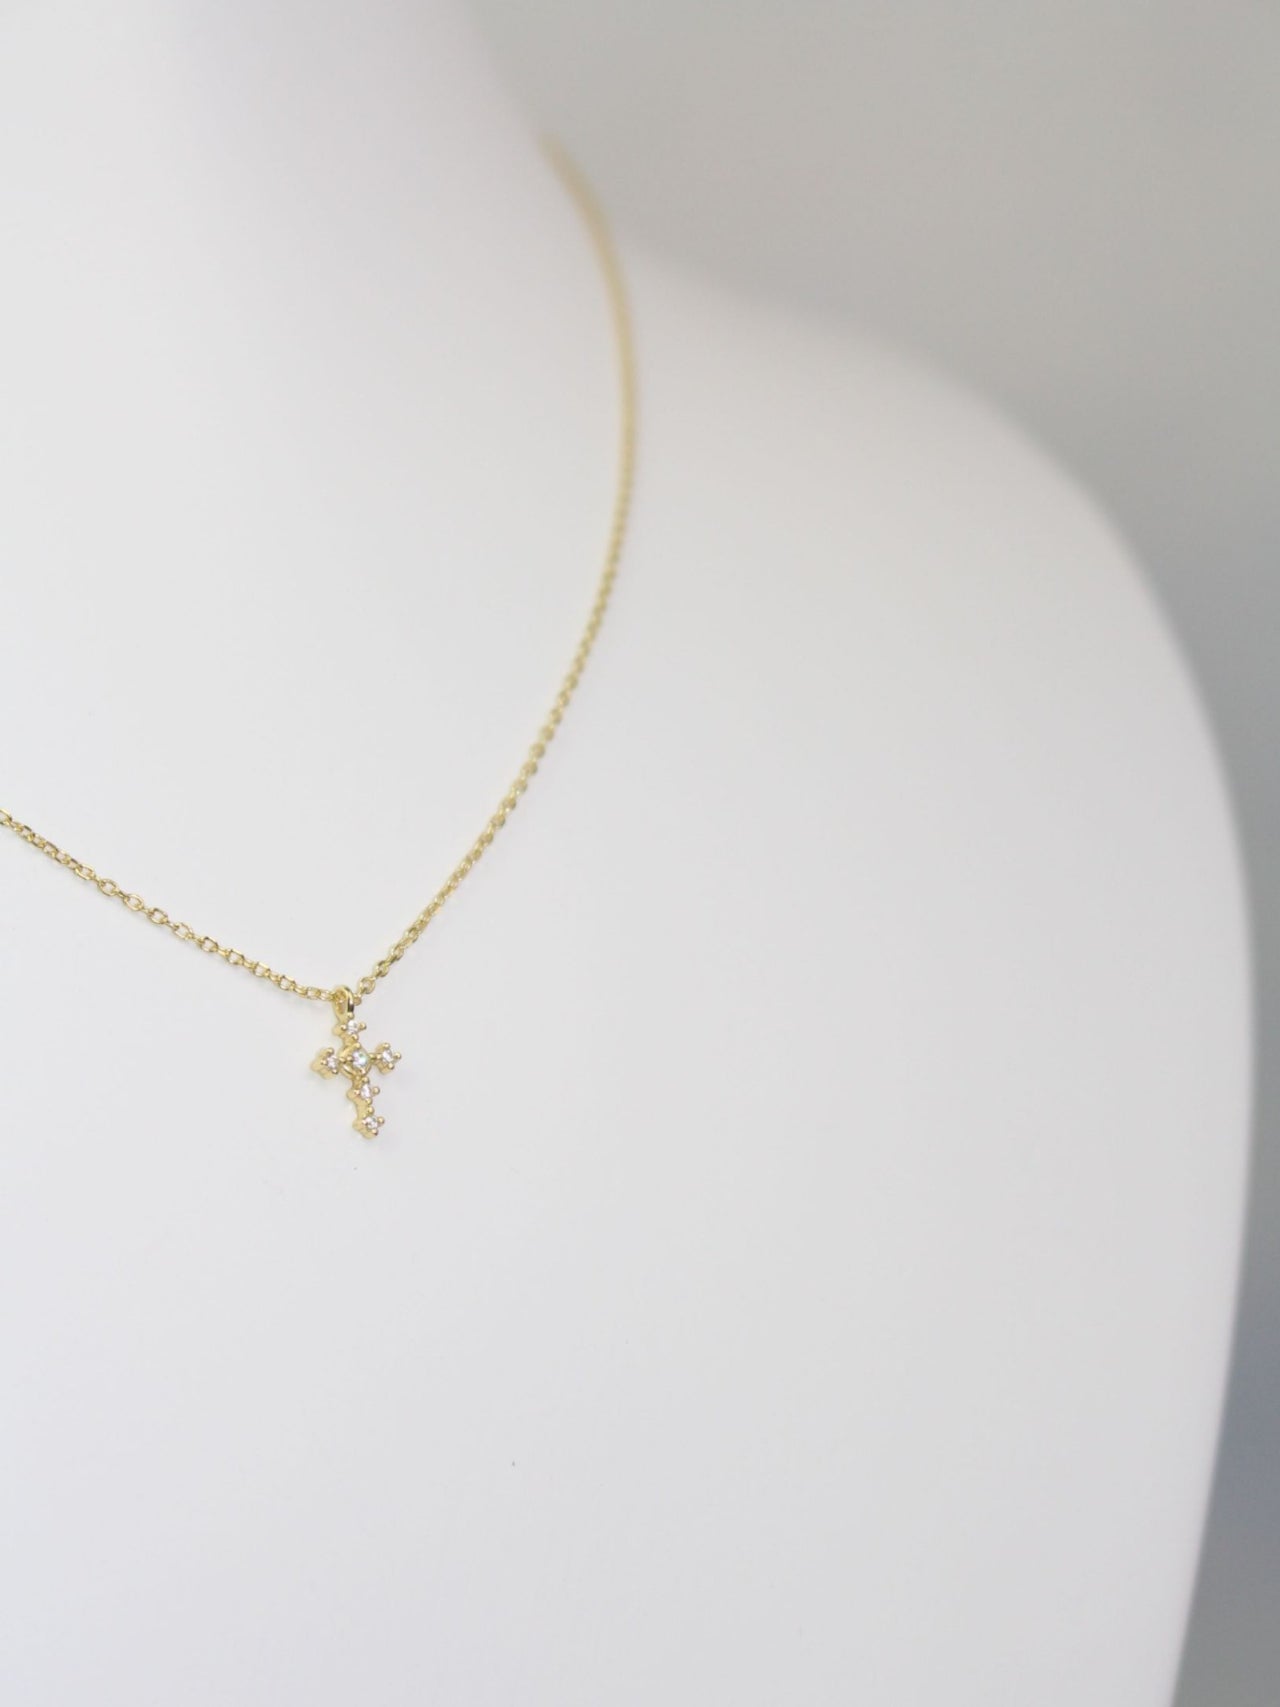 Micro Cross Necklace - Gold